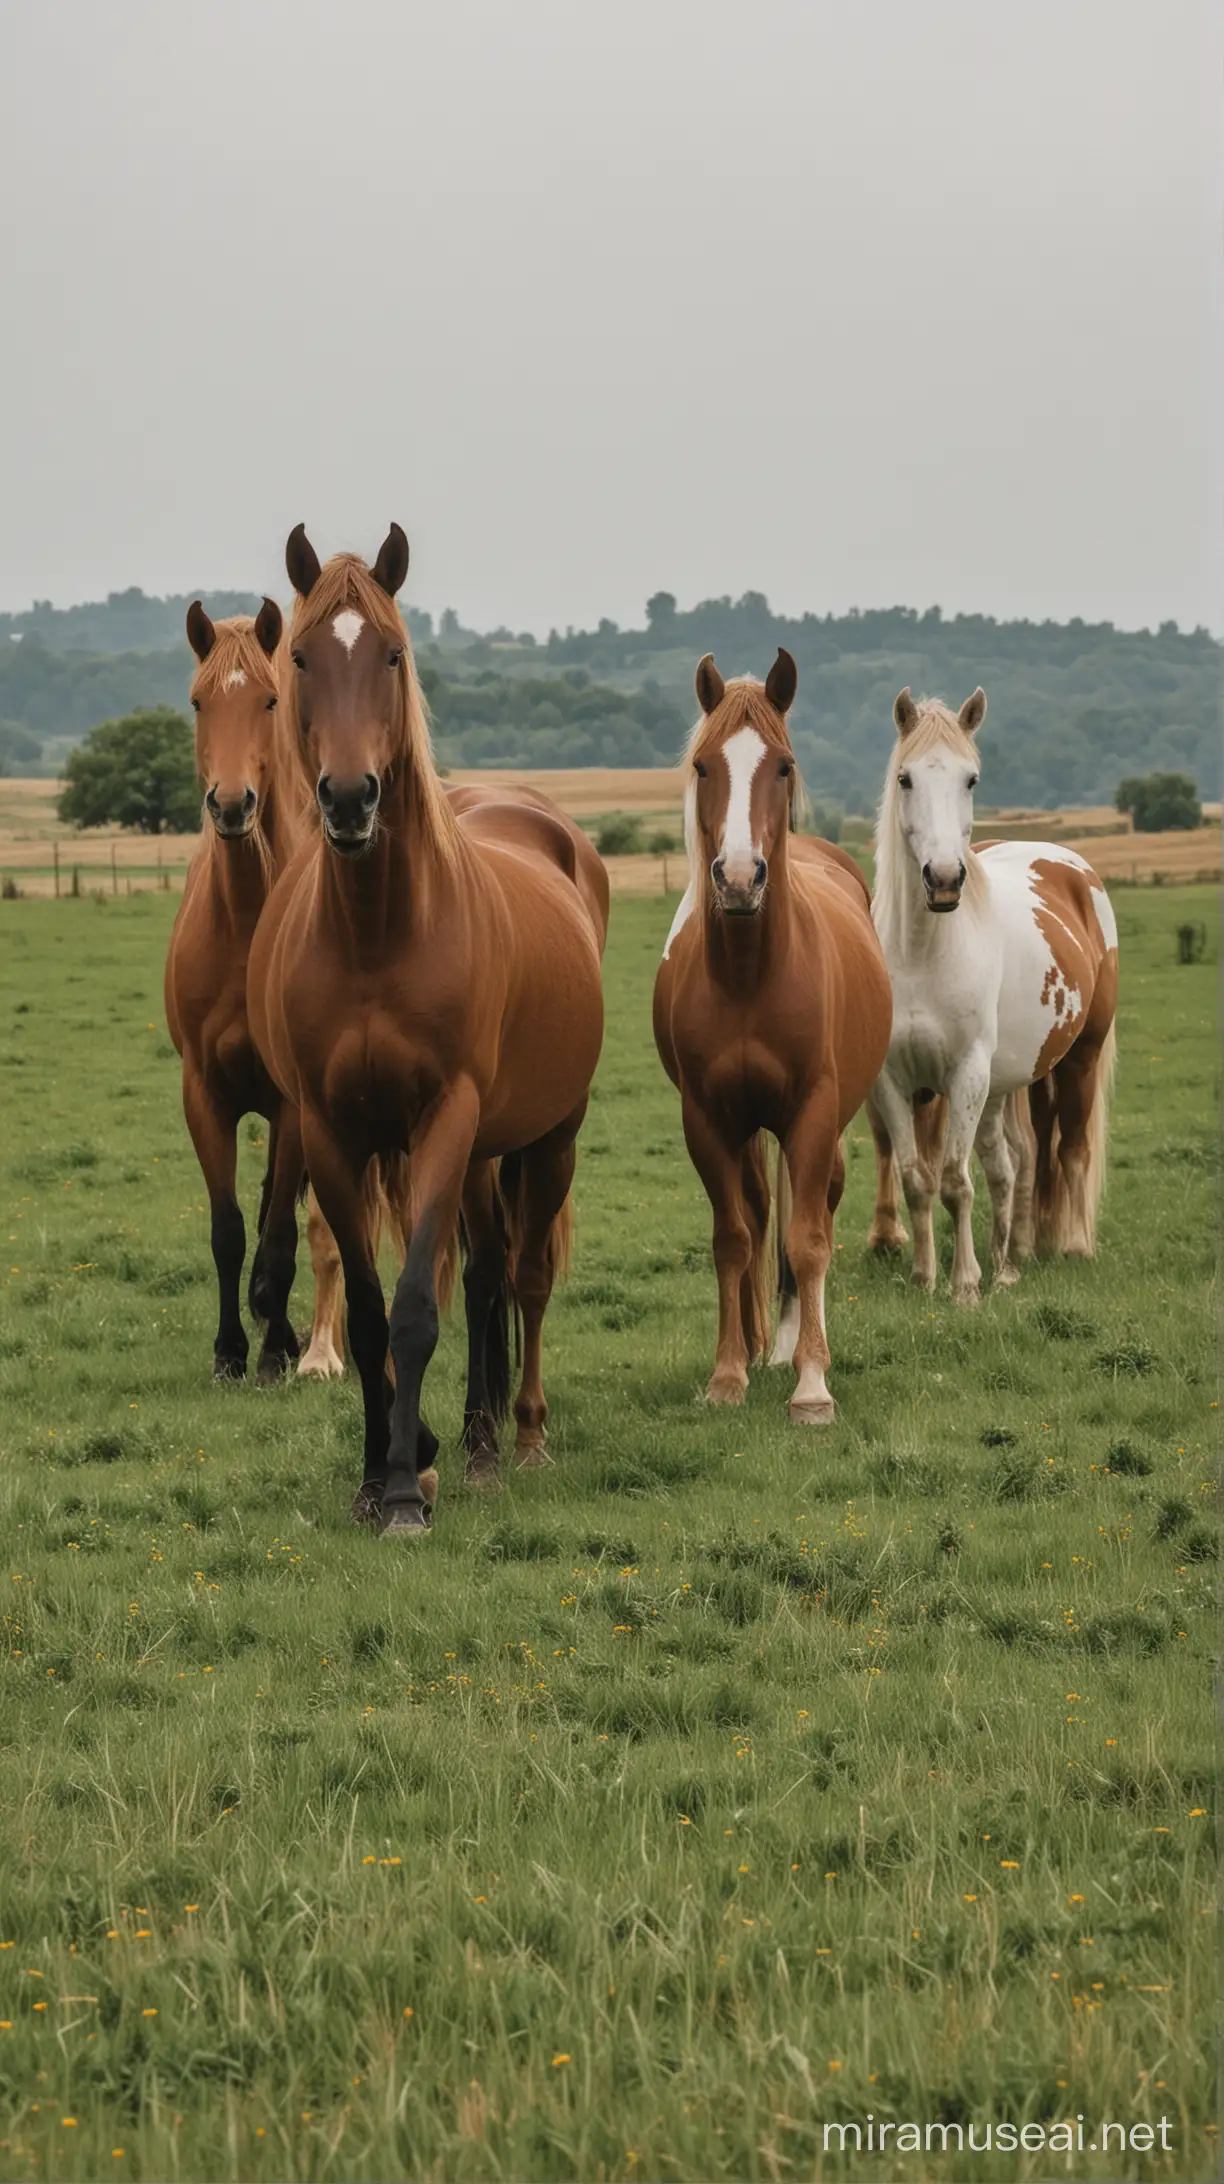 Graceful Horses Standing Together in a Verdant Field